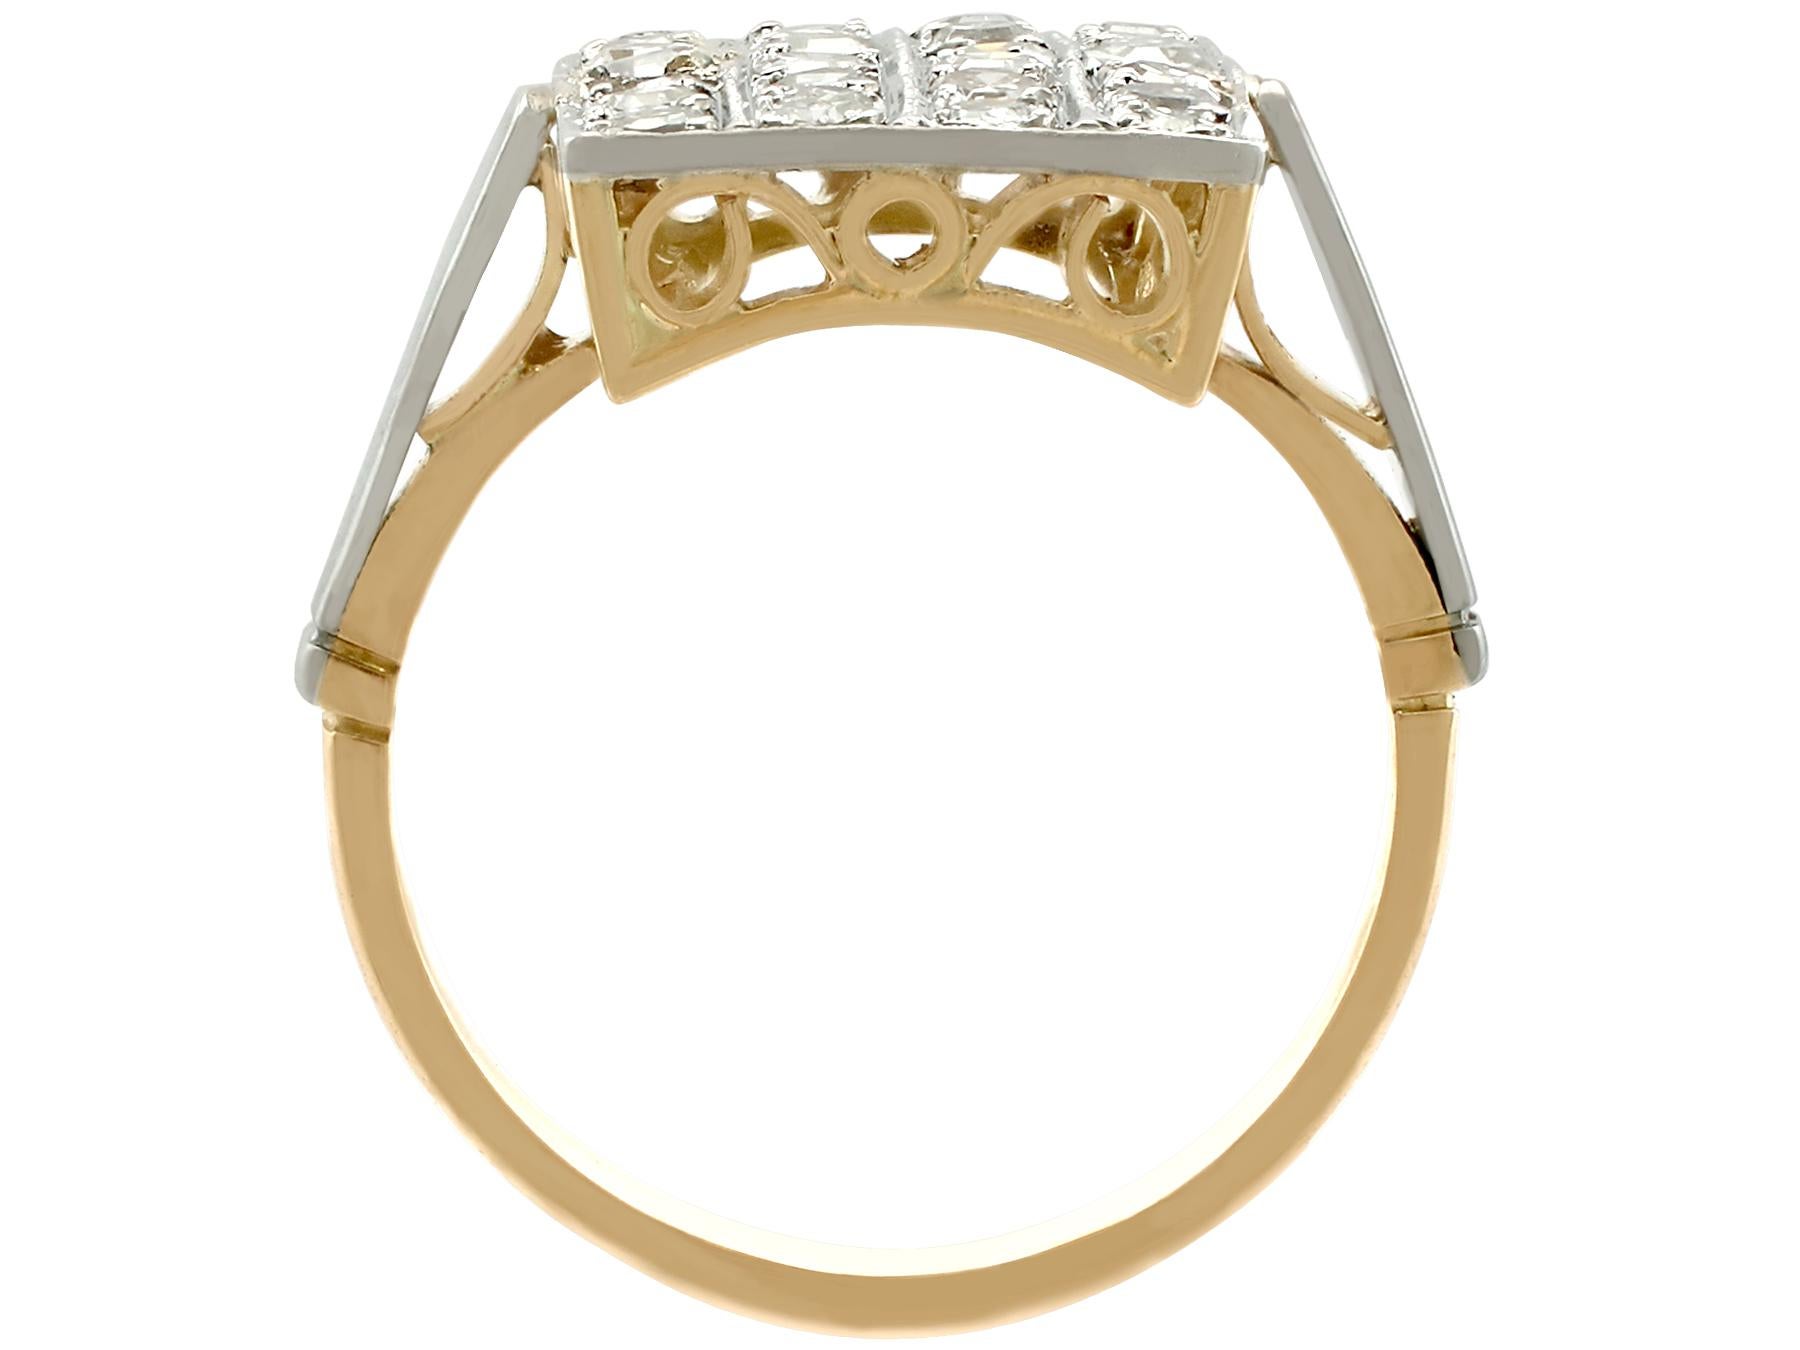 Vintage 1940s 1.42 Carat Diamond and Yellow Gold Cocktail Ring 1